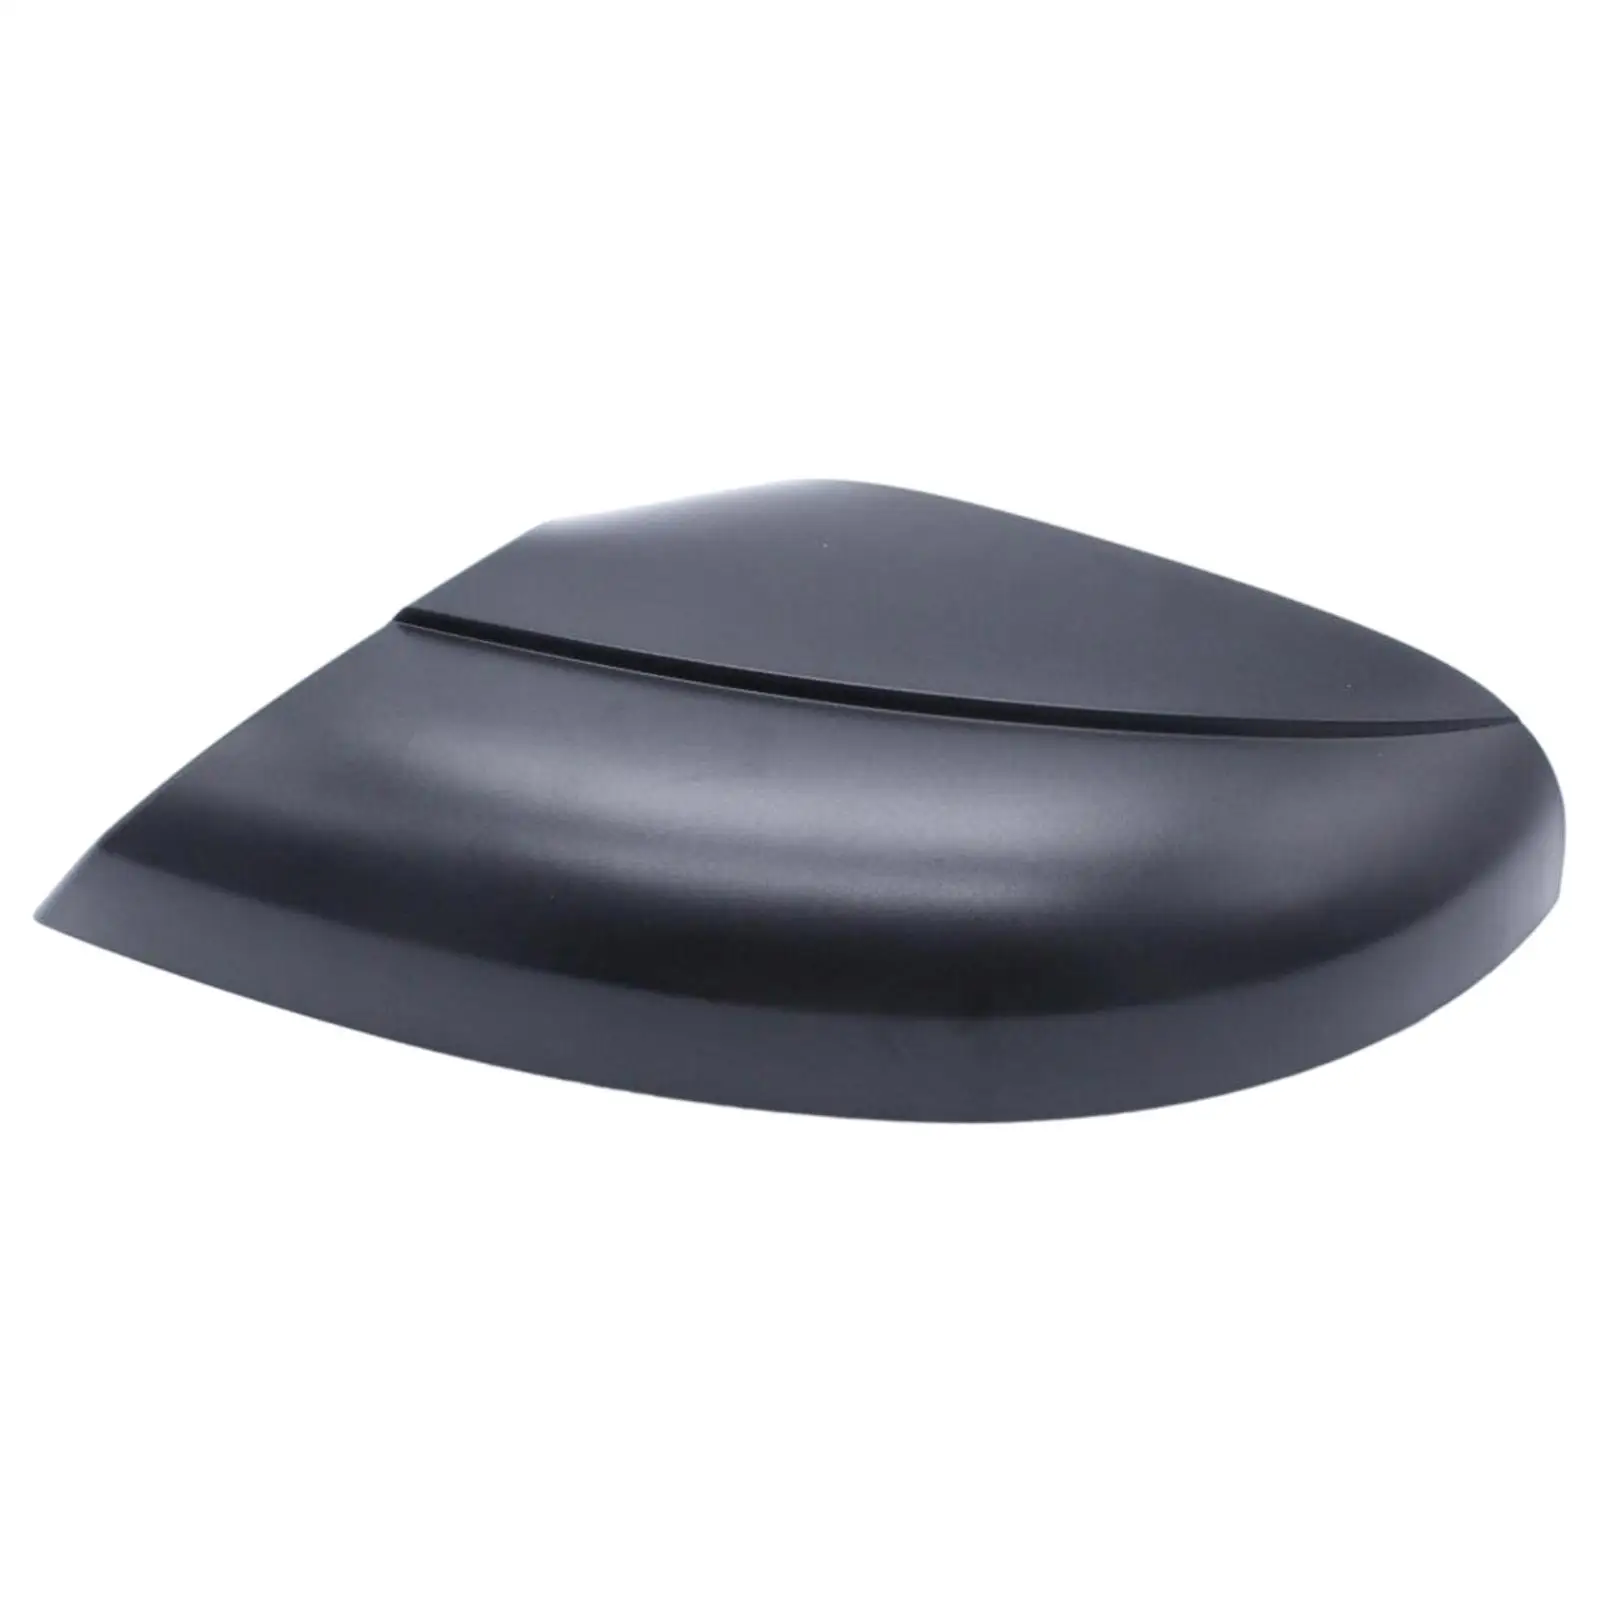 Flameer Rearview Side Mirror Cover Front Right Fit for vw Replacement